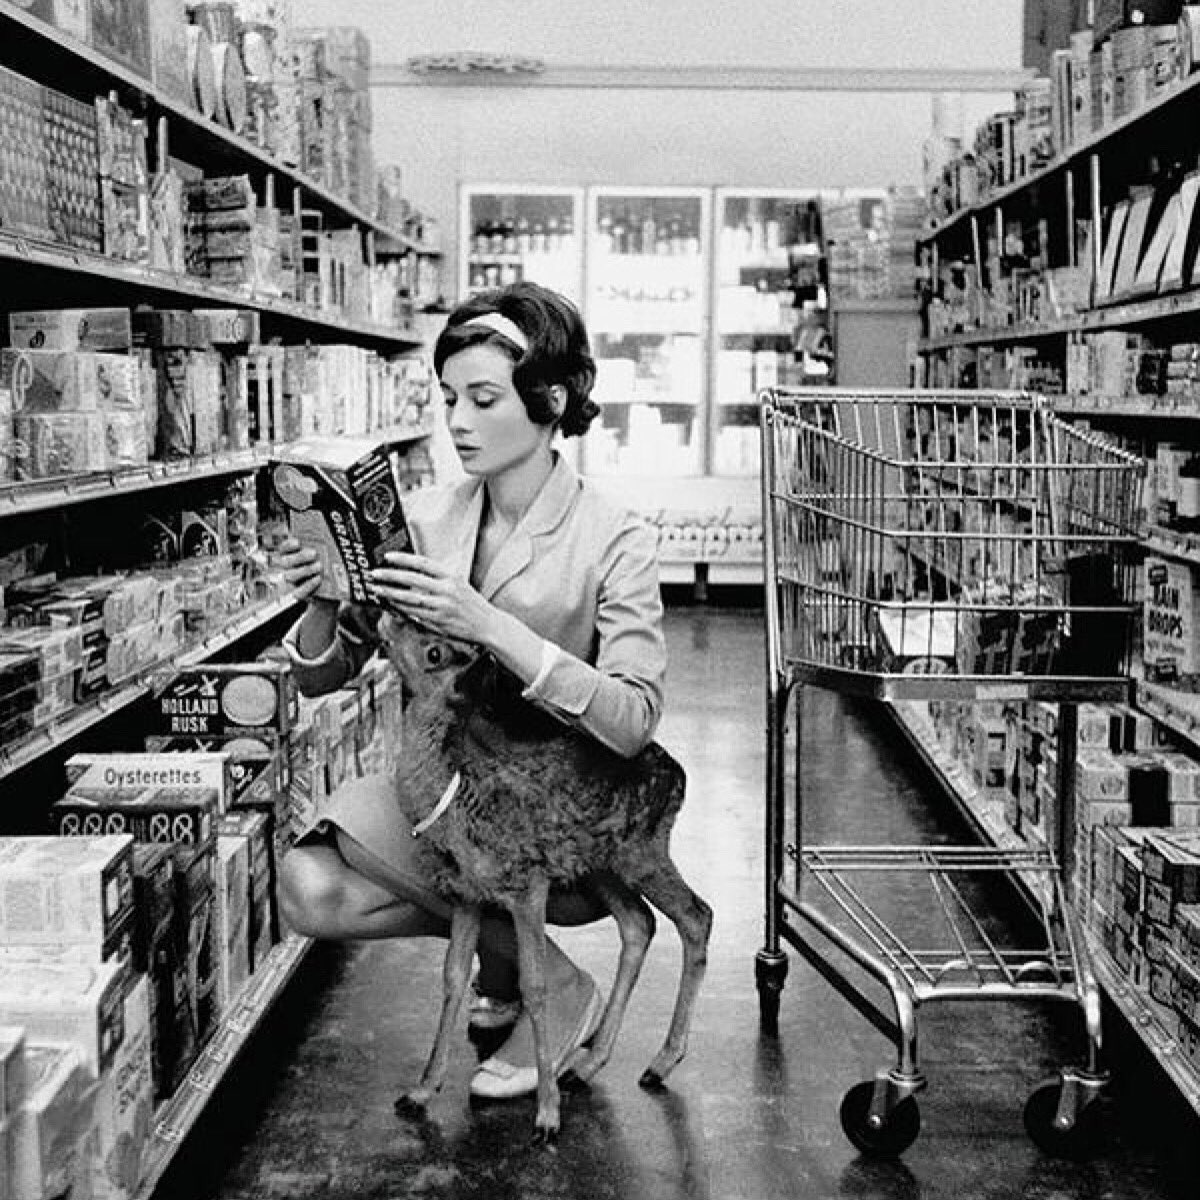 #AudreyHepburn...ya know...in a supermarket...with her pet deer. ???? #MondayMuse https://t.co/1SwLIXlTOR